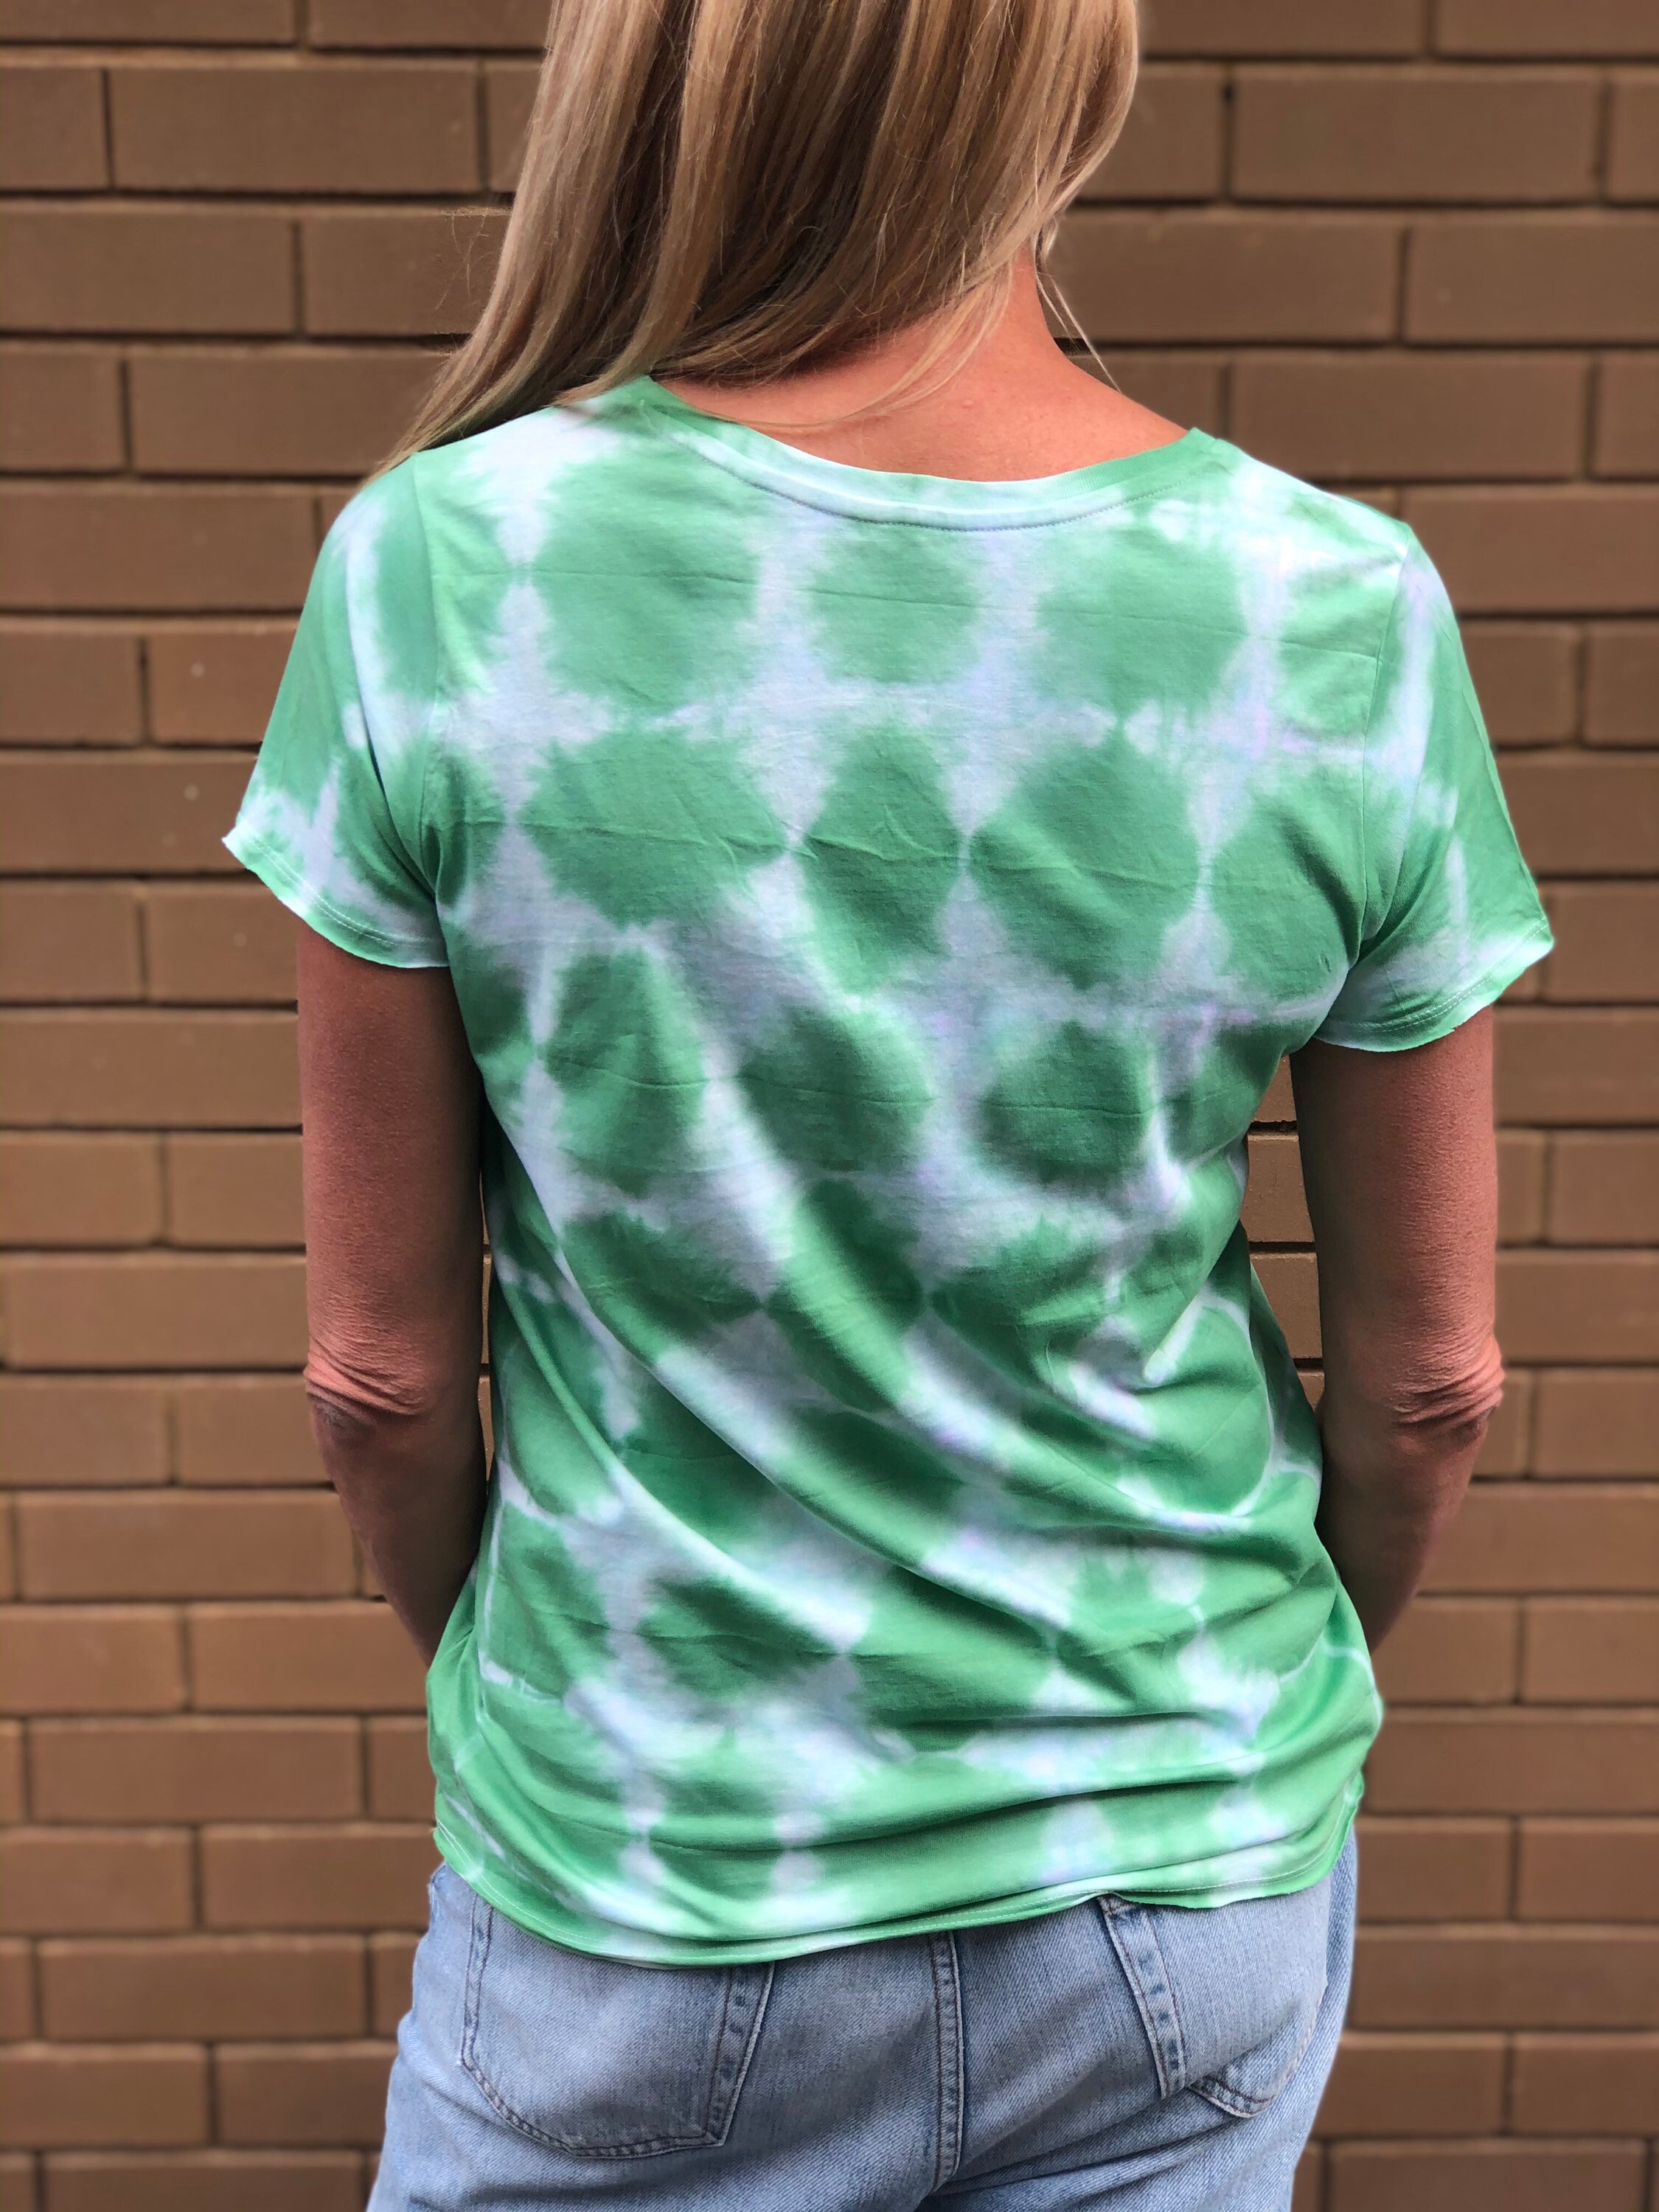 Tie dye womens organic cotton t-shirt with raw hem and sleeve | Etsy